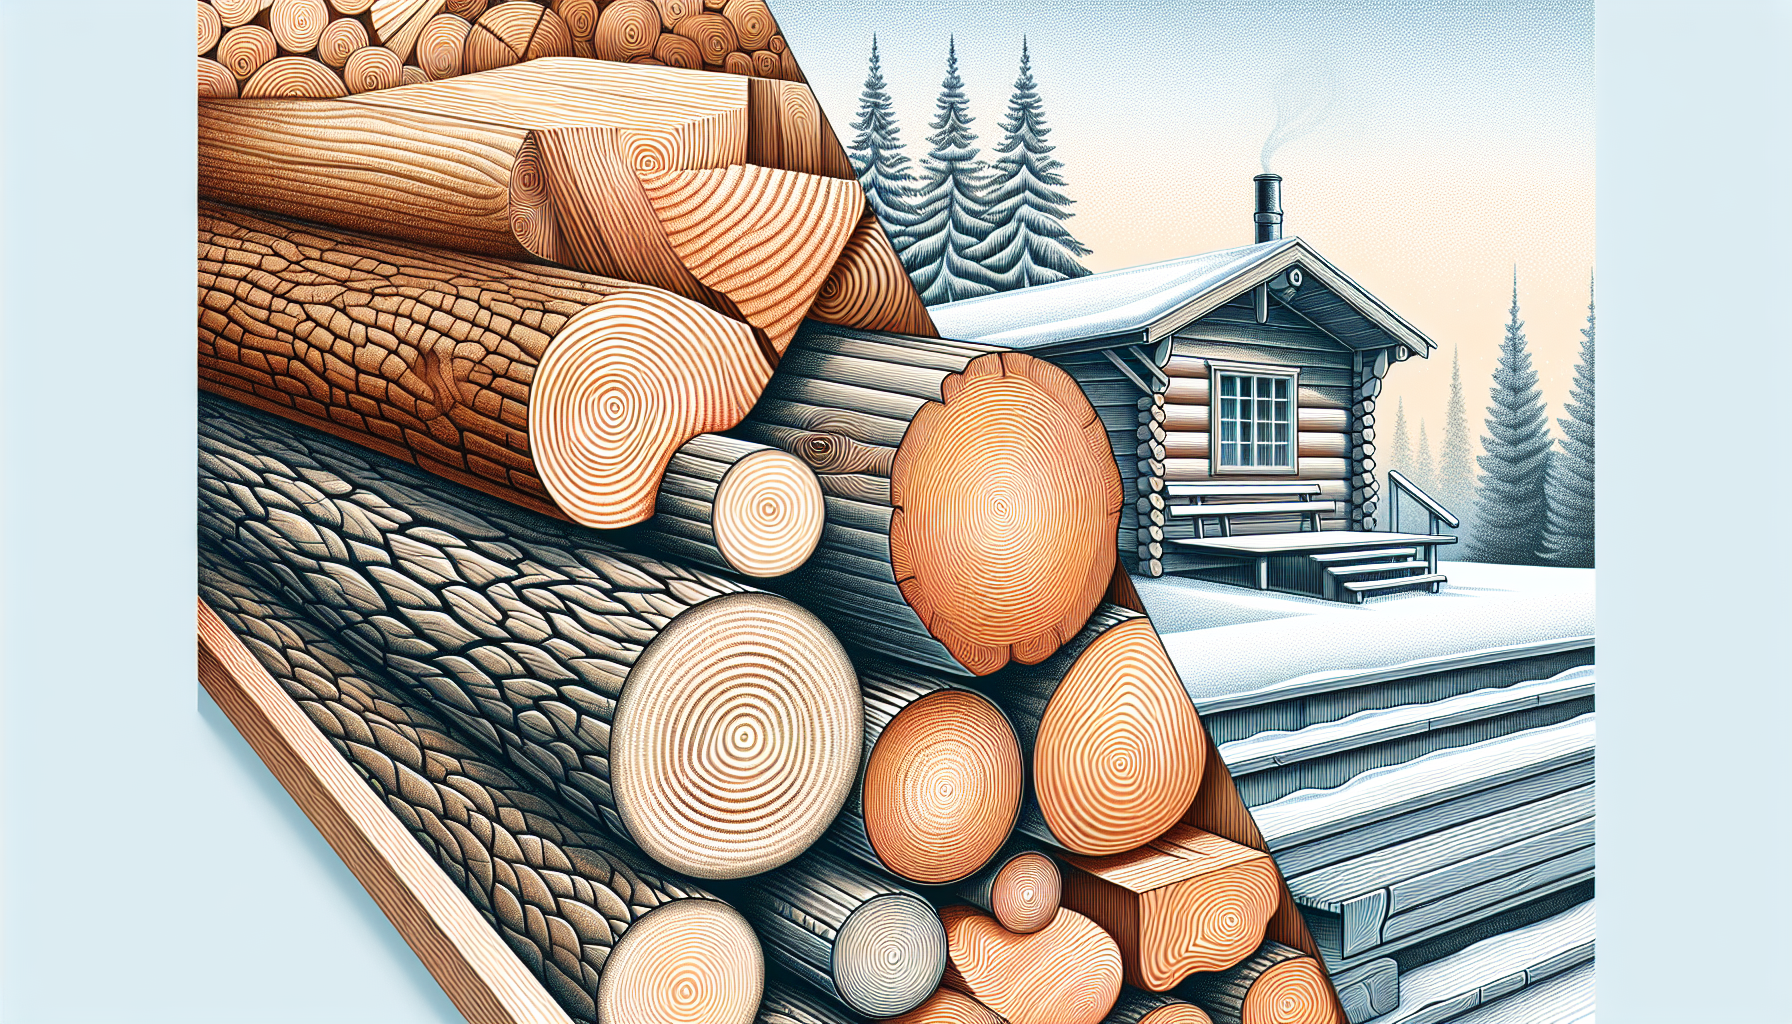 High-quality Nordic spruce and cedar wood for outdoor saunas